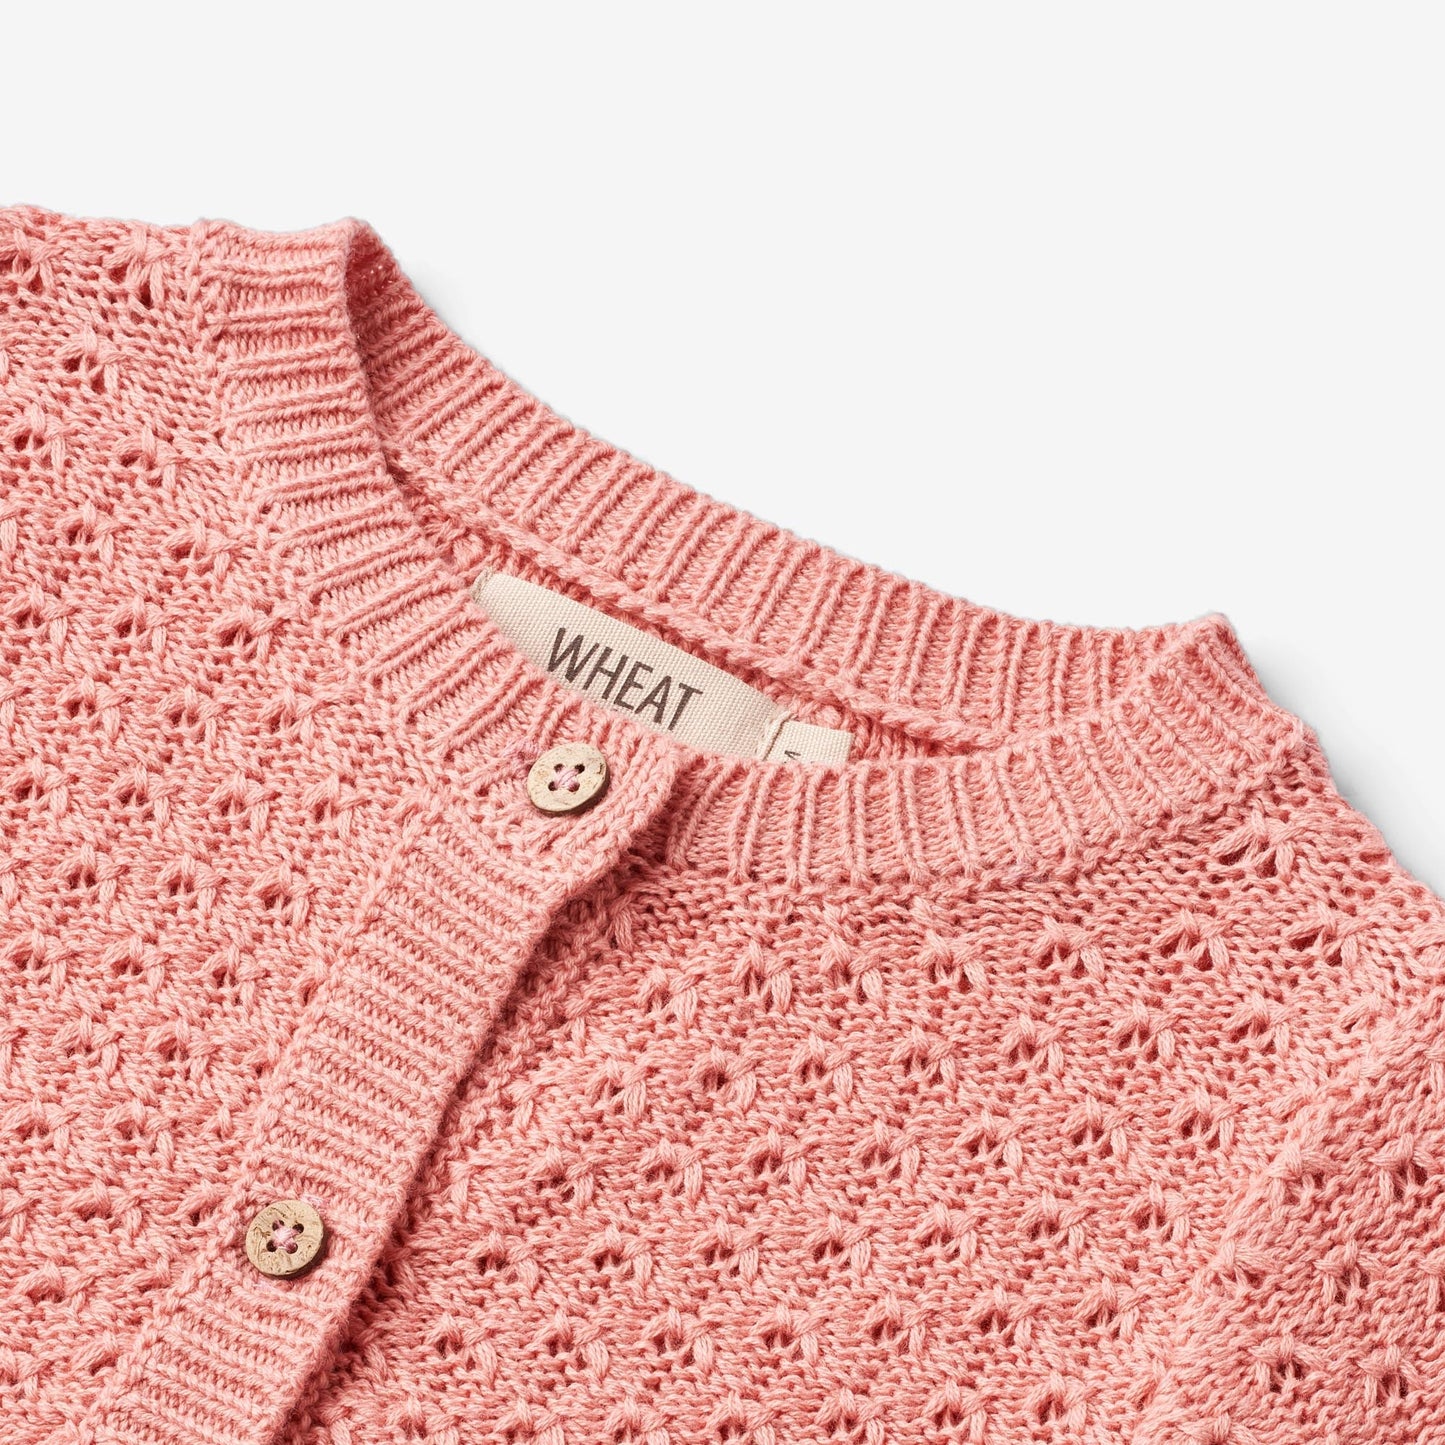 Wheat 'Magnella' Baby Knit Cardigan - Rosette